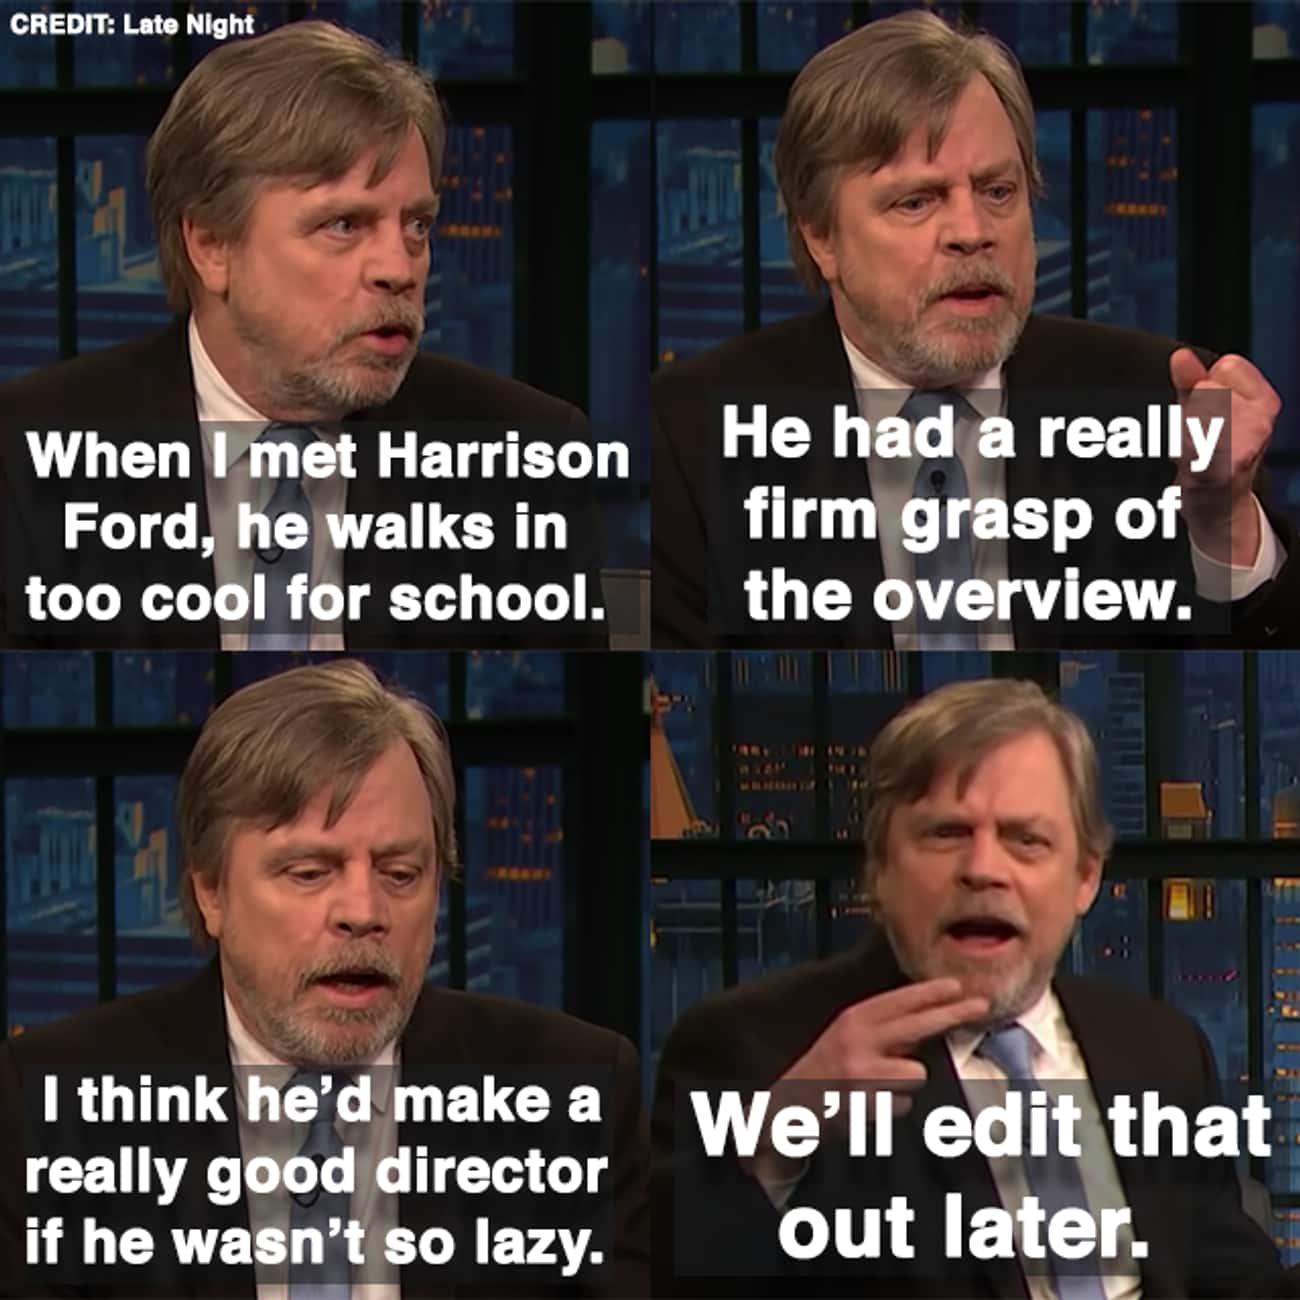 Mark Hamill Thinks Harrison Ford Would Make A Really Good Director On One Condition